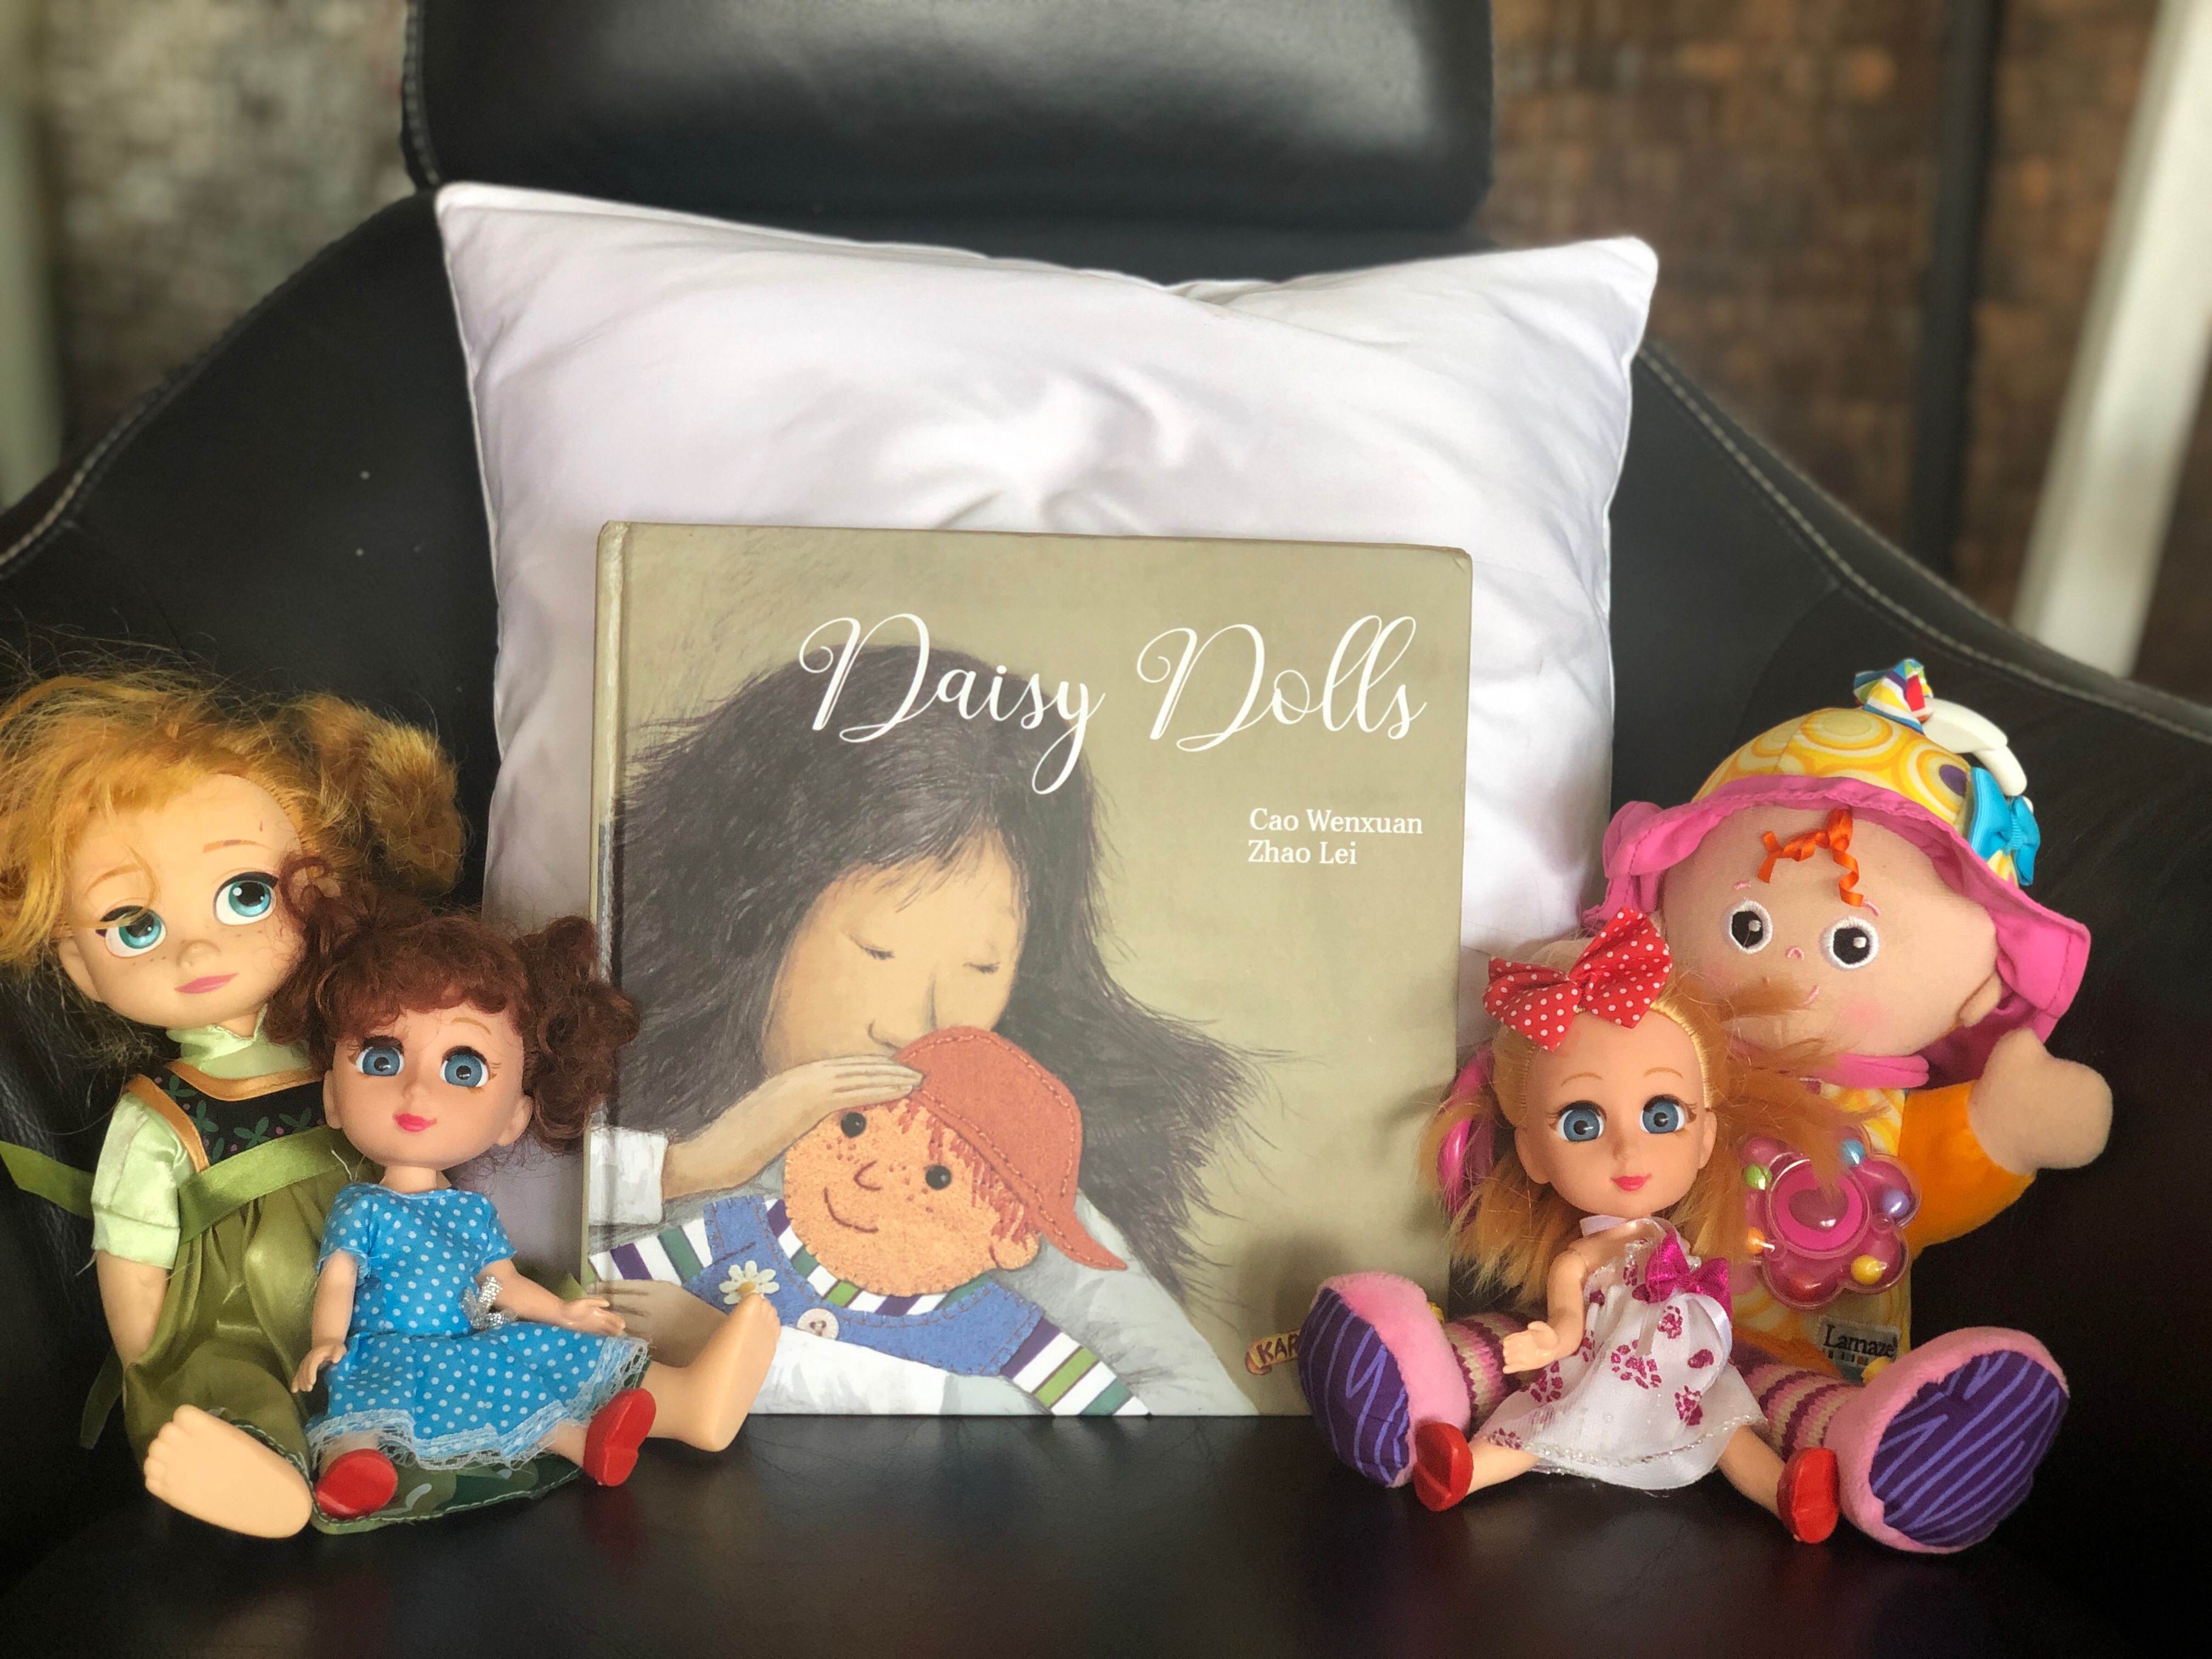 You are currently viewing Daisy Dolls by Cao Wenxuan and Zhao Lei